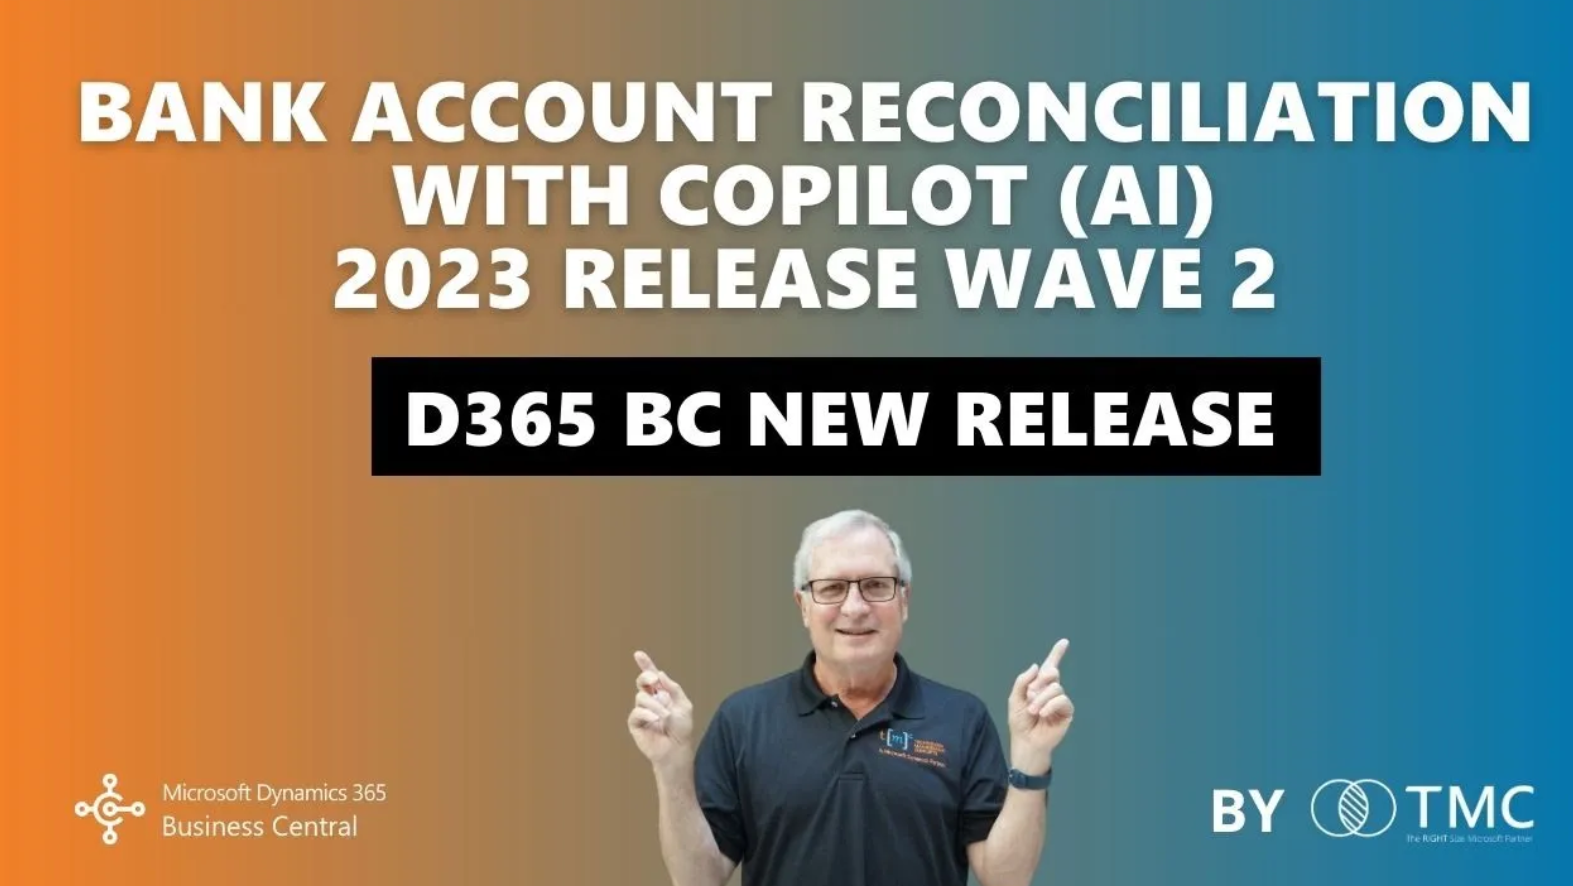 Microsoft Dynamics 365 | 2023 Release Wave 2 Bank Reconciliation with Copilot in Business Central